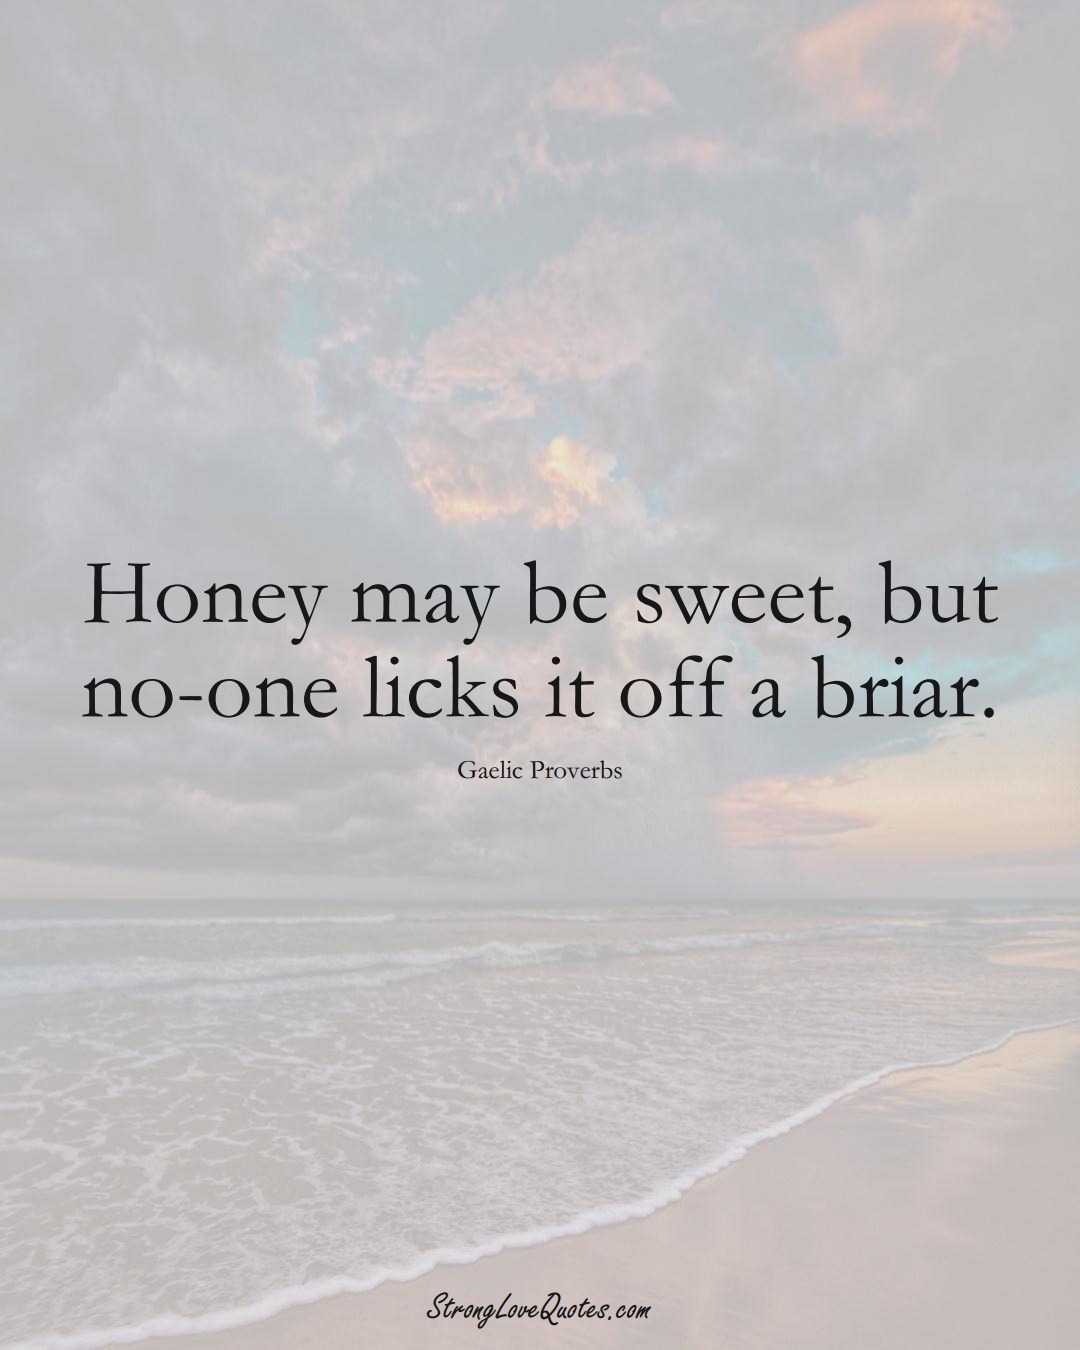 Honey may be sweet, but no-one licks it off a briar. (Gaelic Sayings);  #aVarietyofCulturesSayings